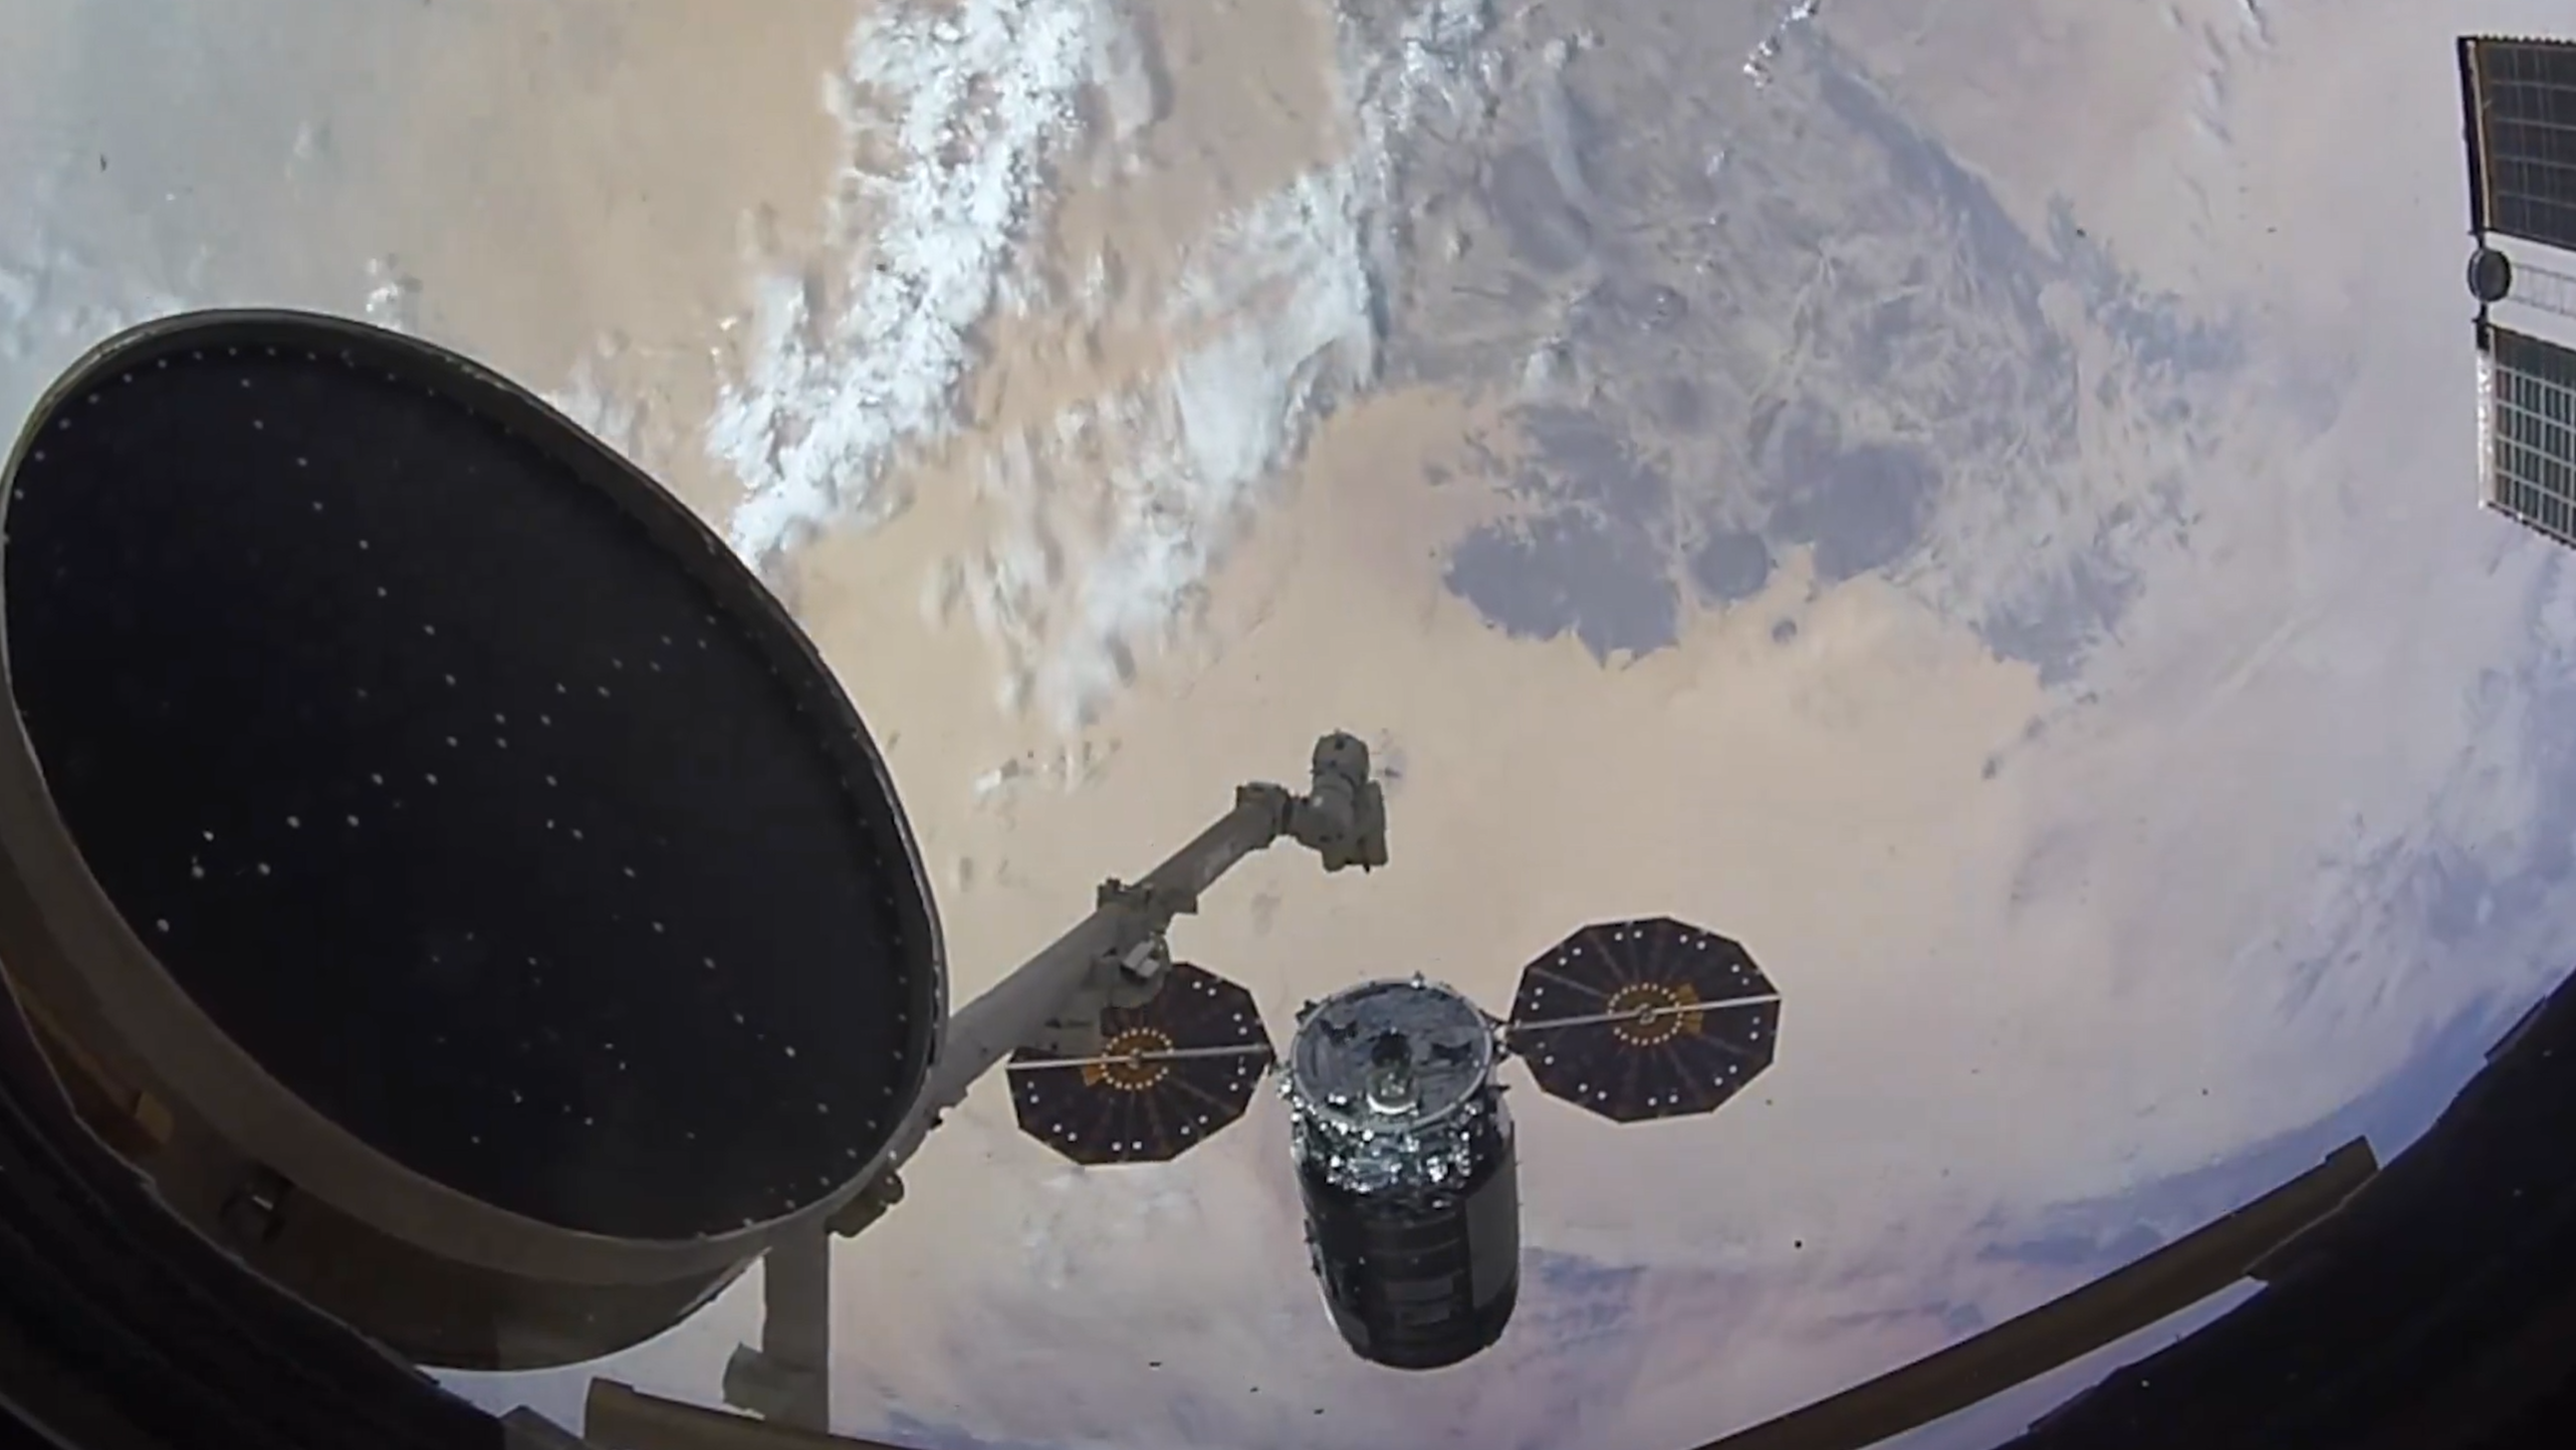 ISS astronauts show what it’s like to capture a spacecraft with a robotic arm (video) Space